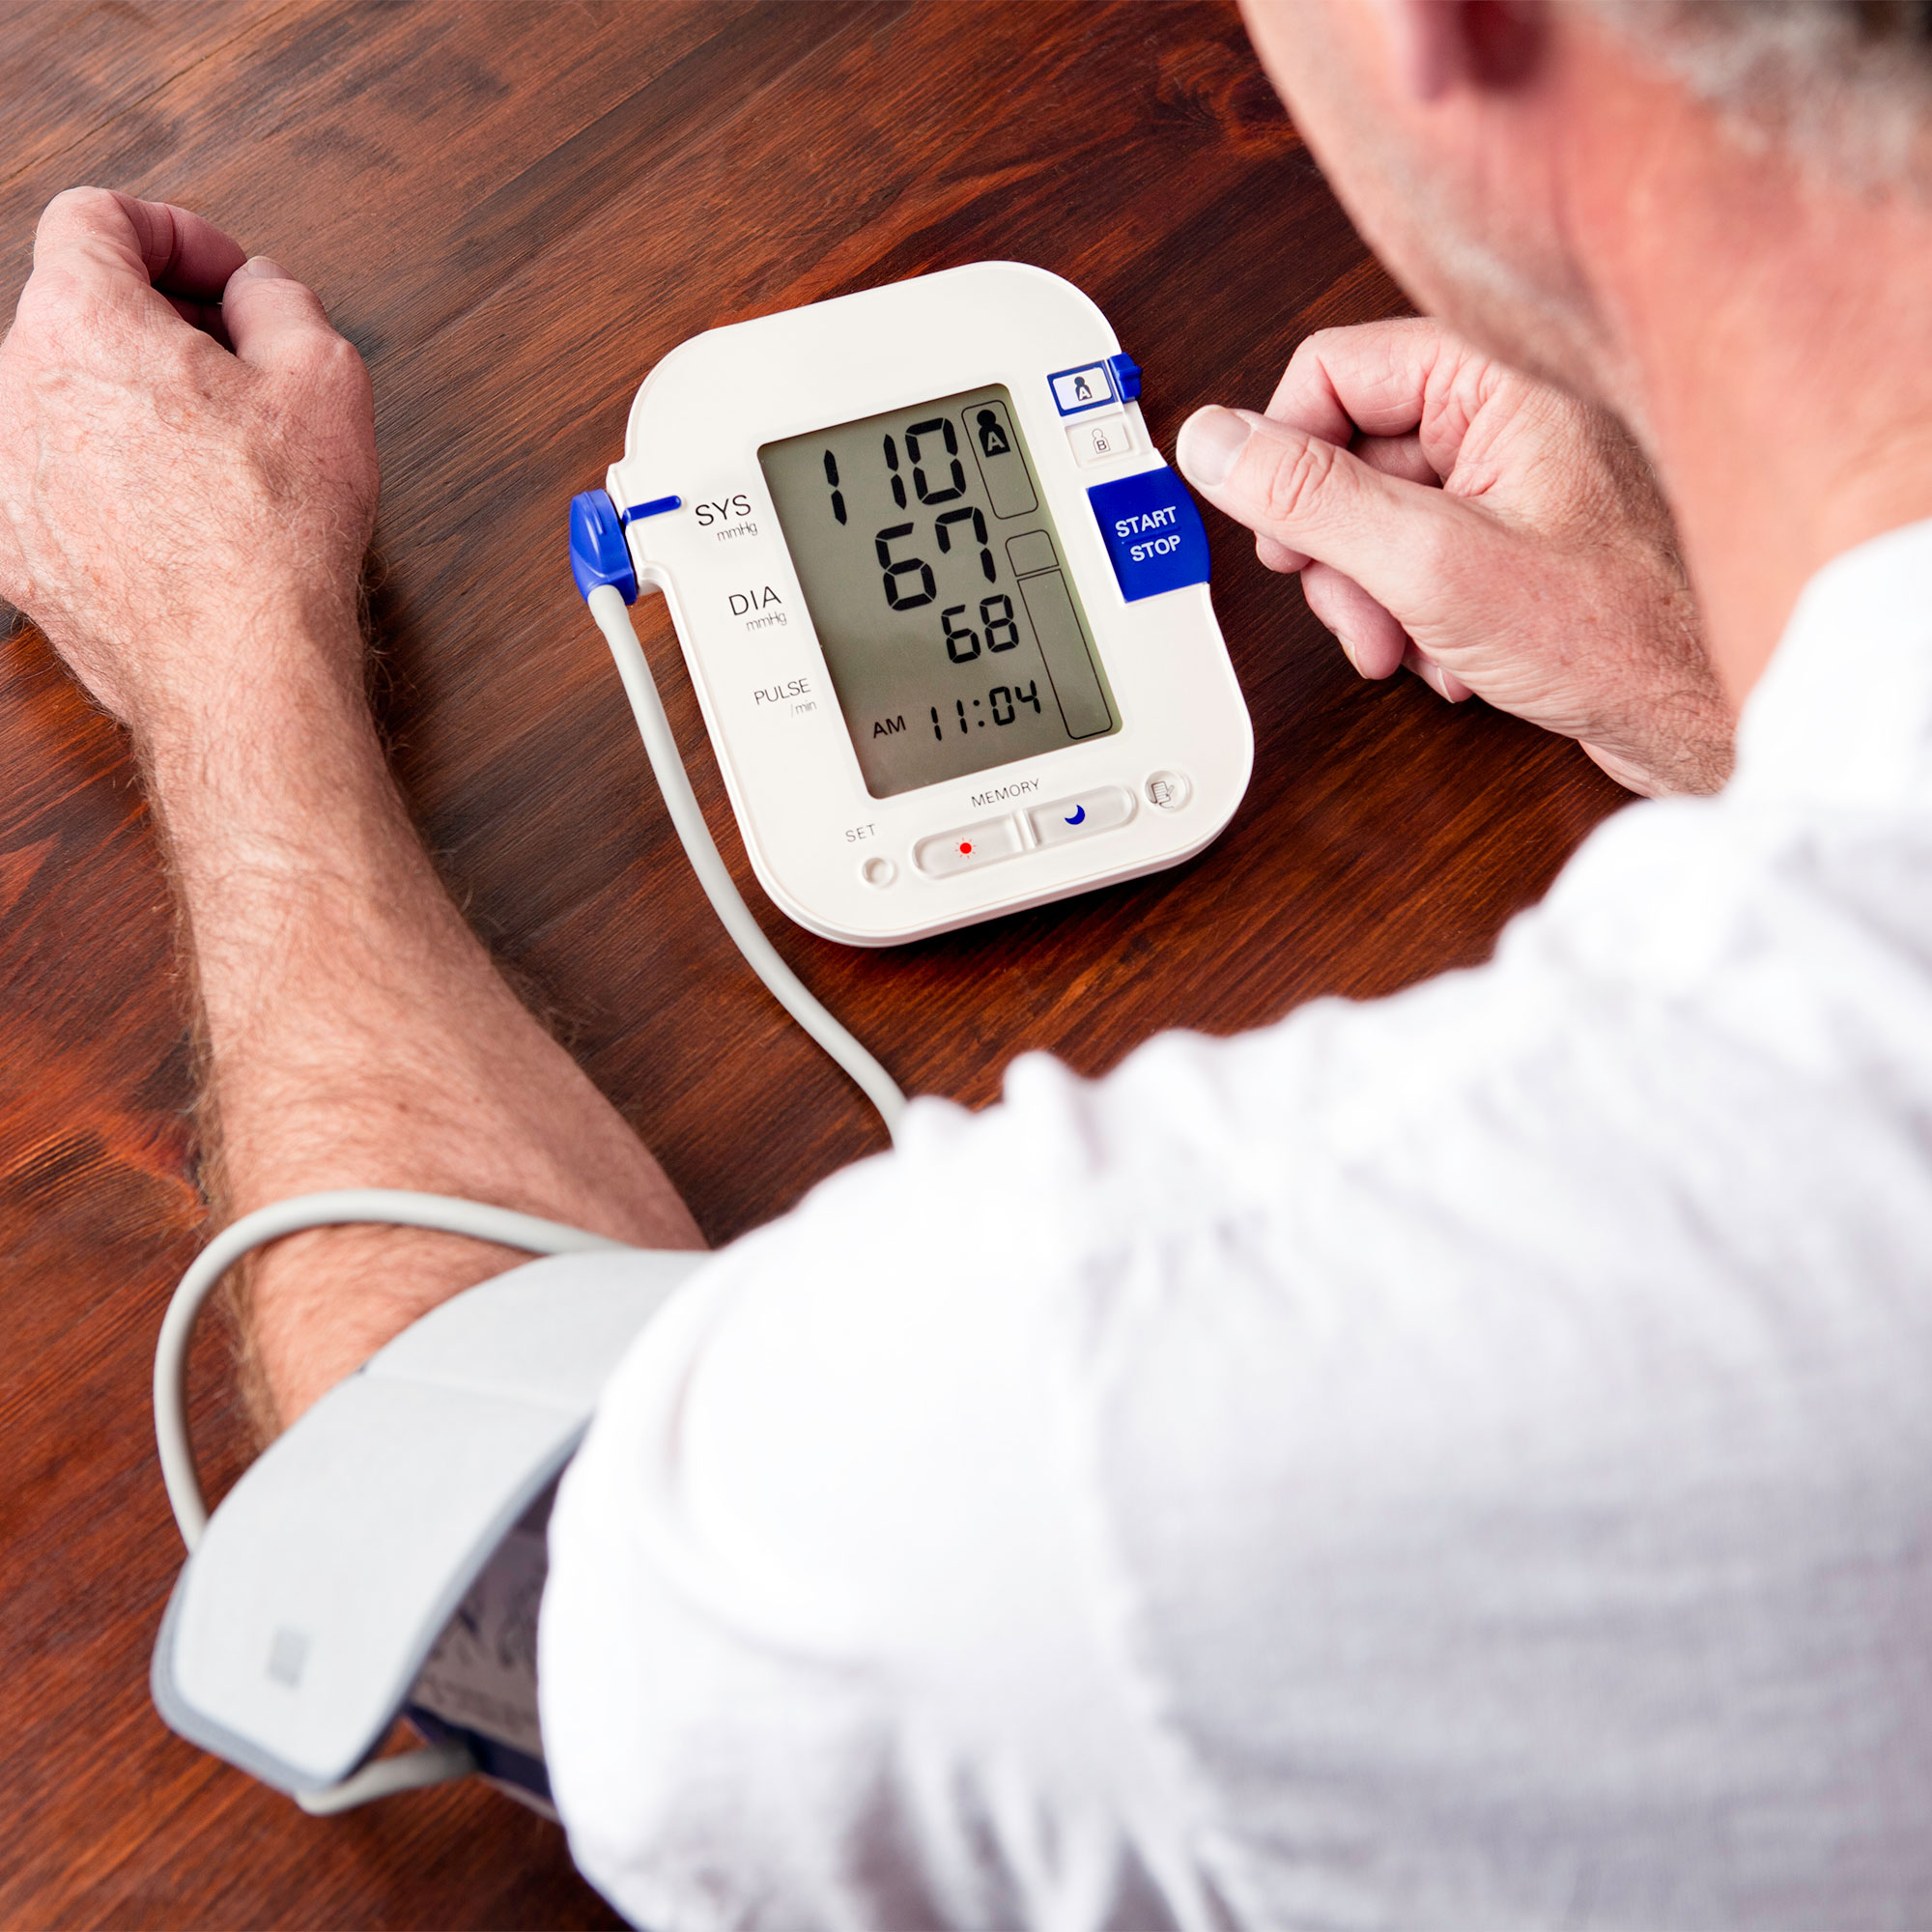 Blood Pressure Tips: How to Accurately Check Your BP At Home and At The  Clinic